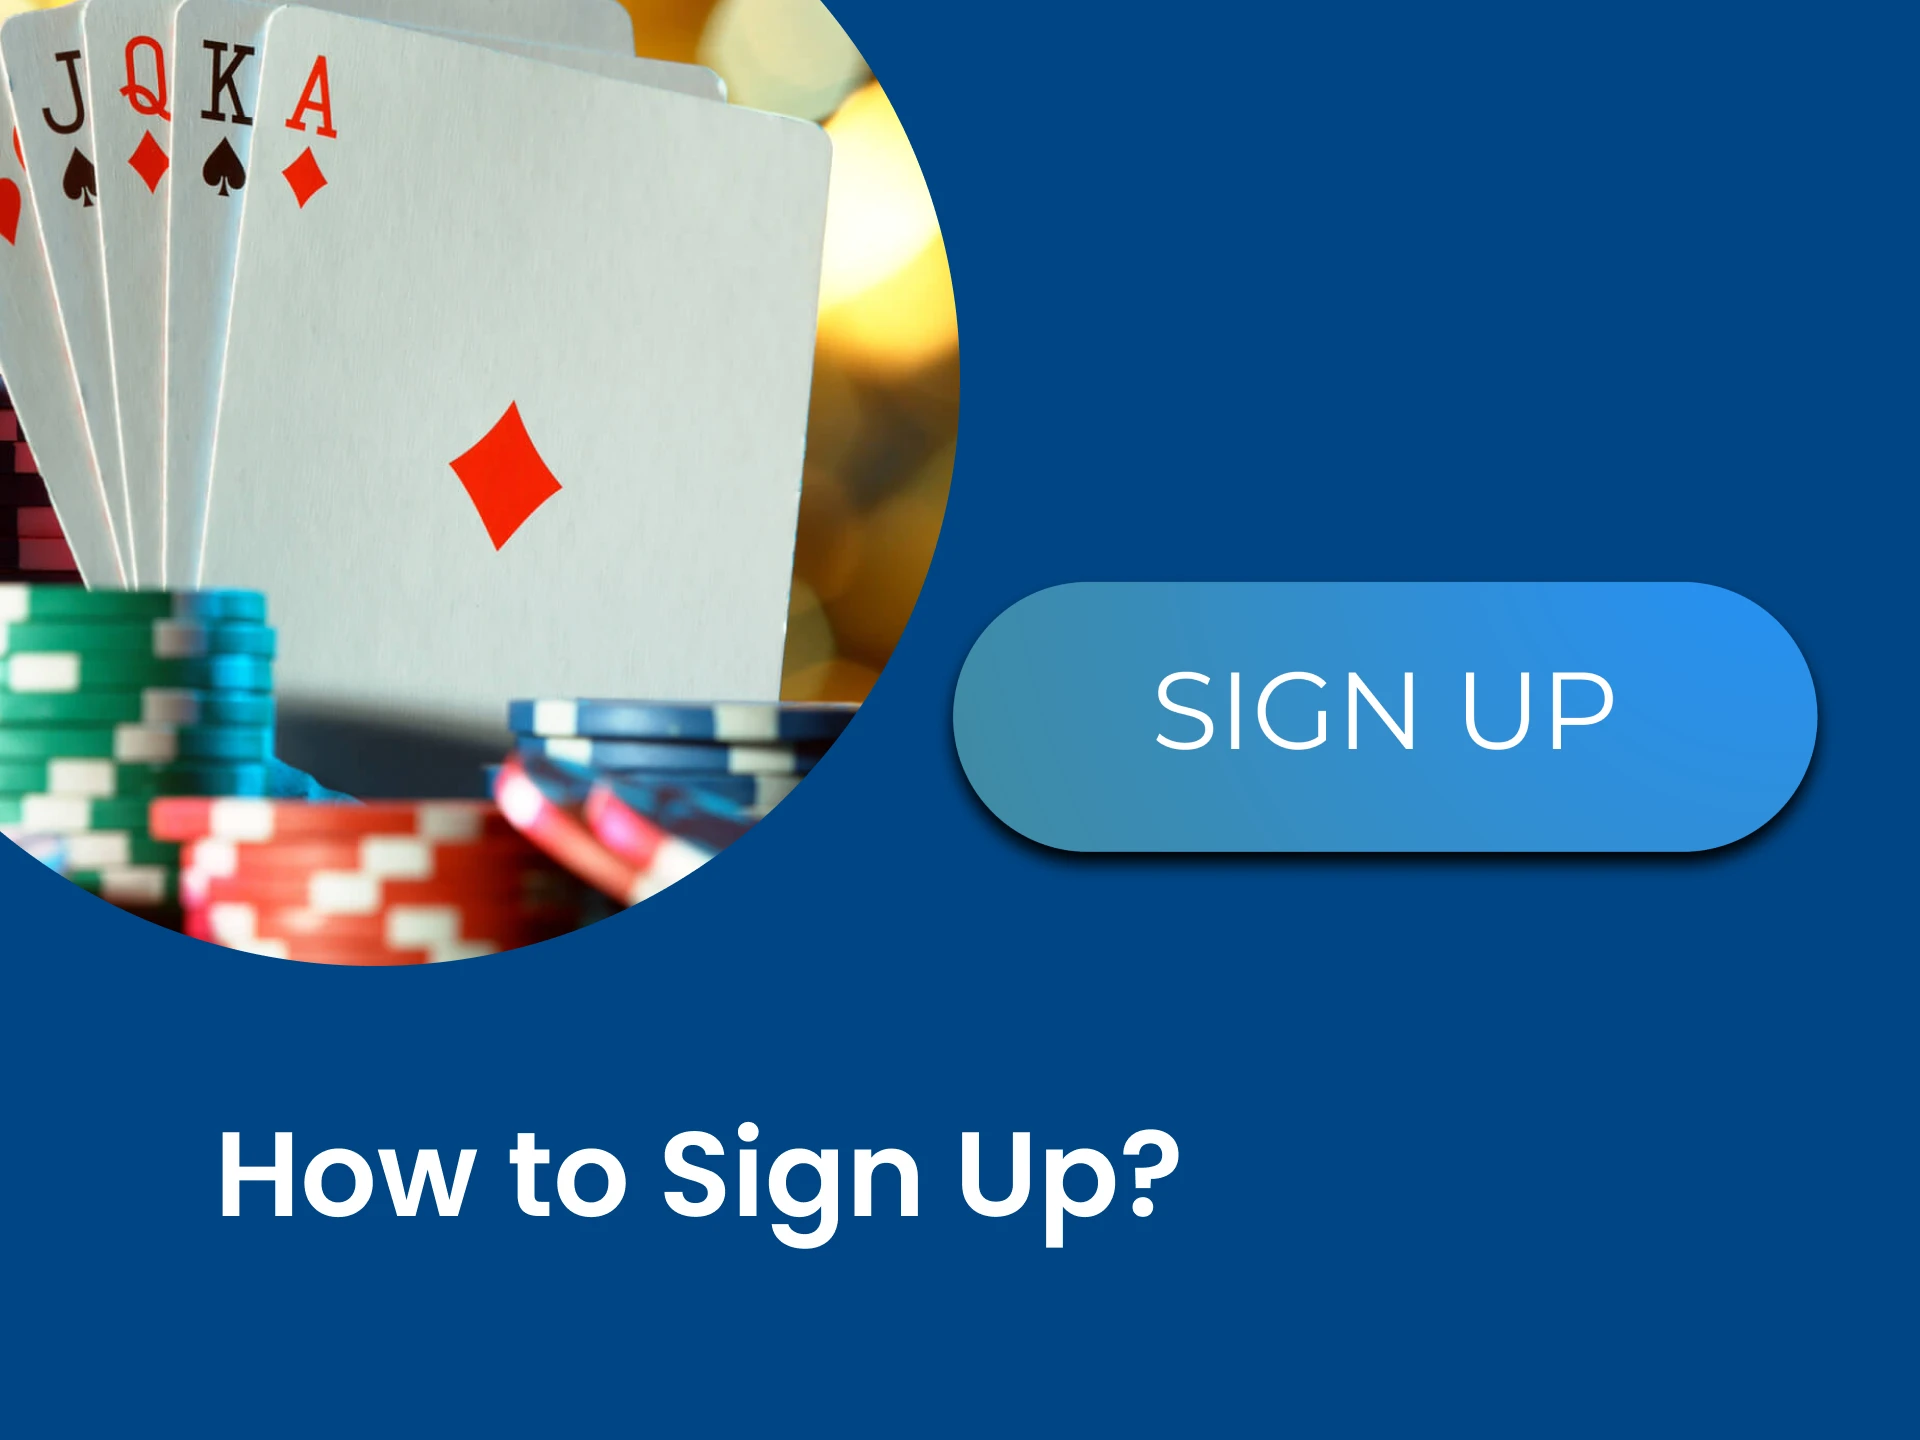 Find out how to log into the casino app to play BlackJack.